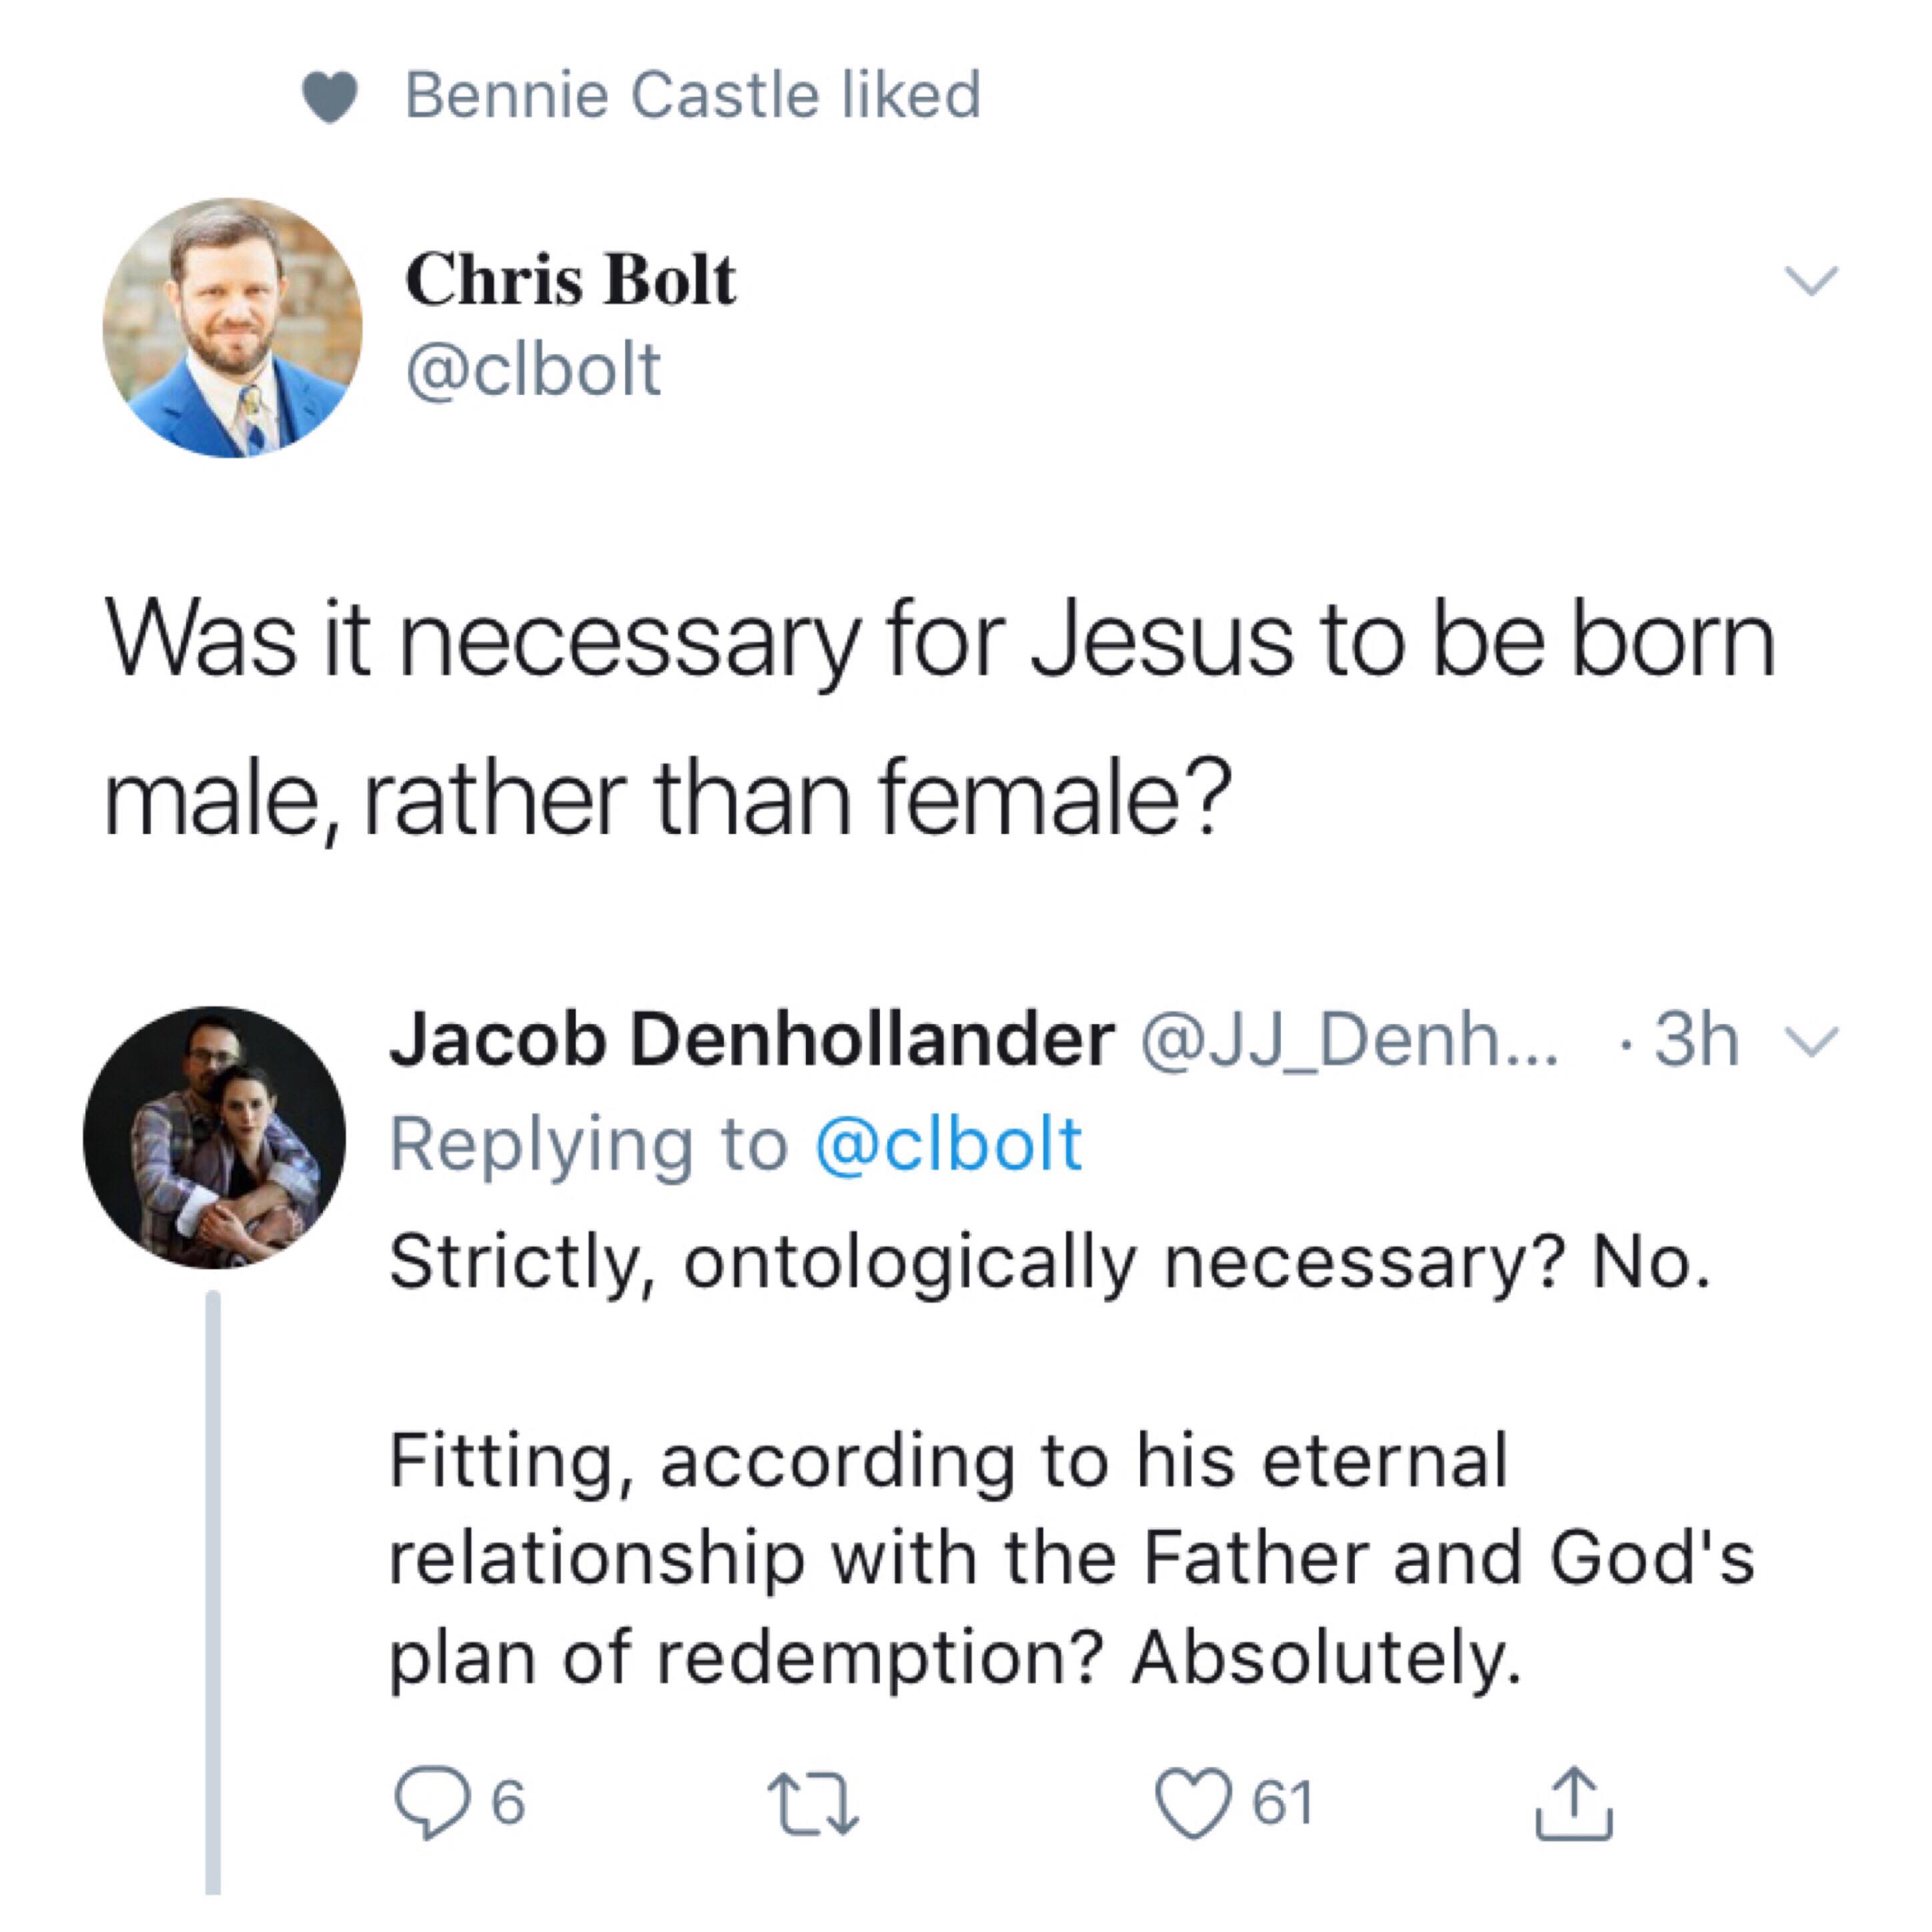 A dismal response from Jacob Denhollander to Chris Bolt's question about whether it was necessary for Jesus to be born male